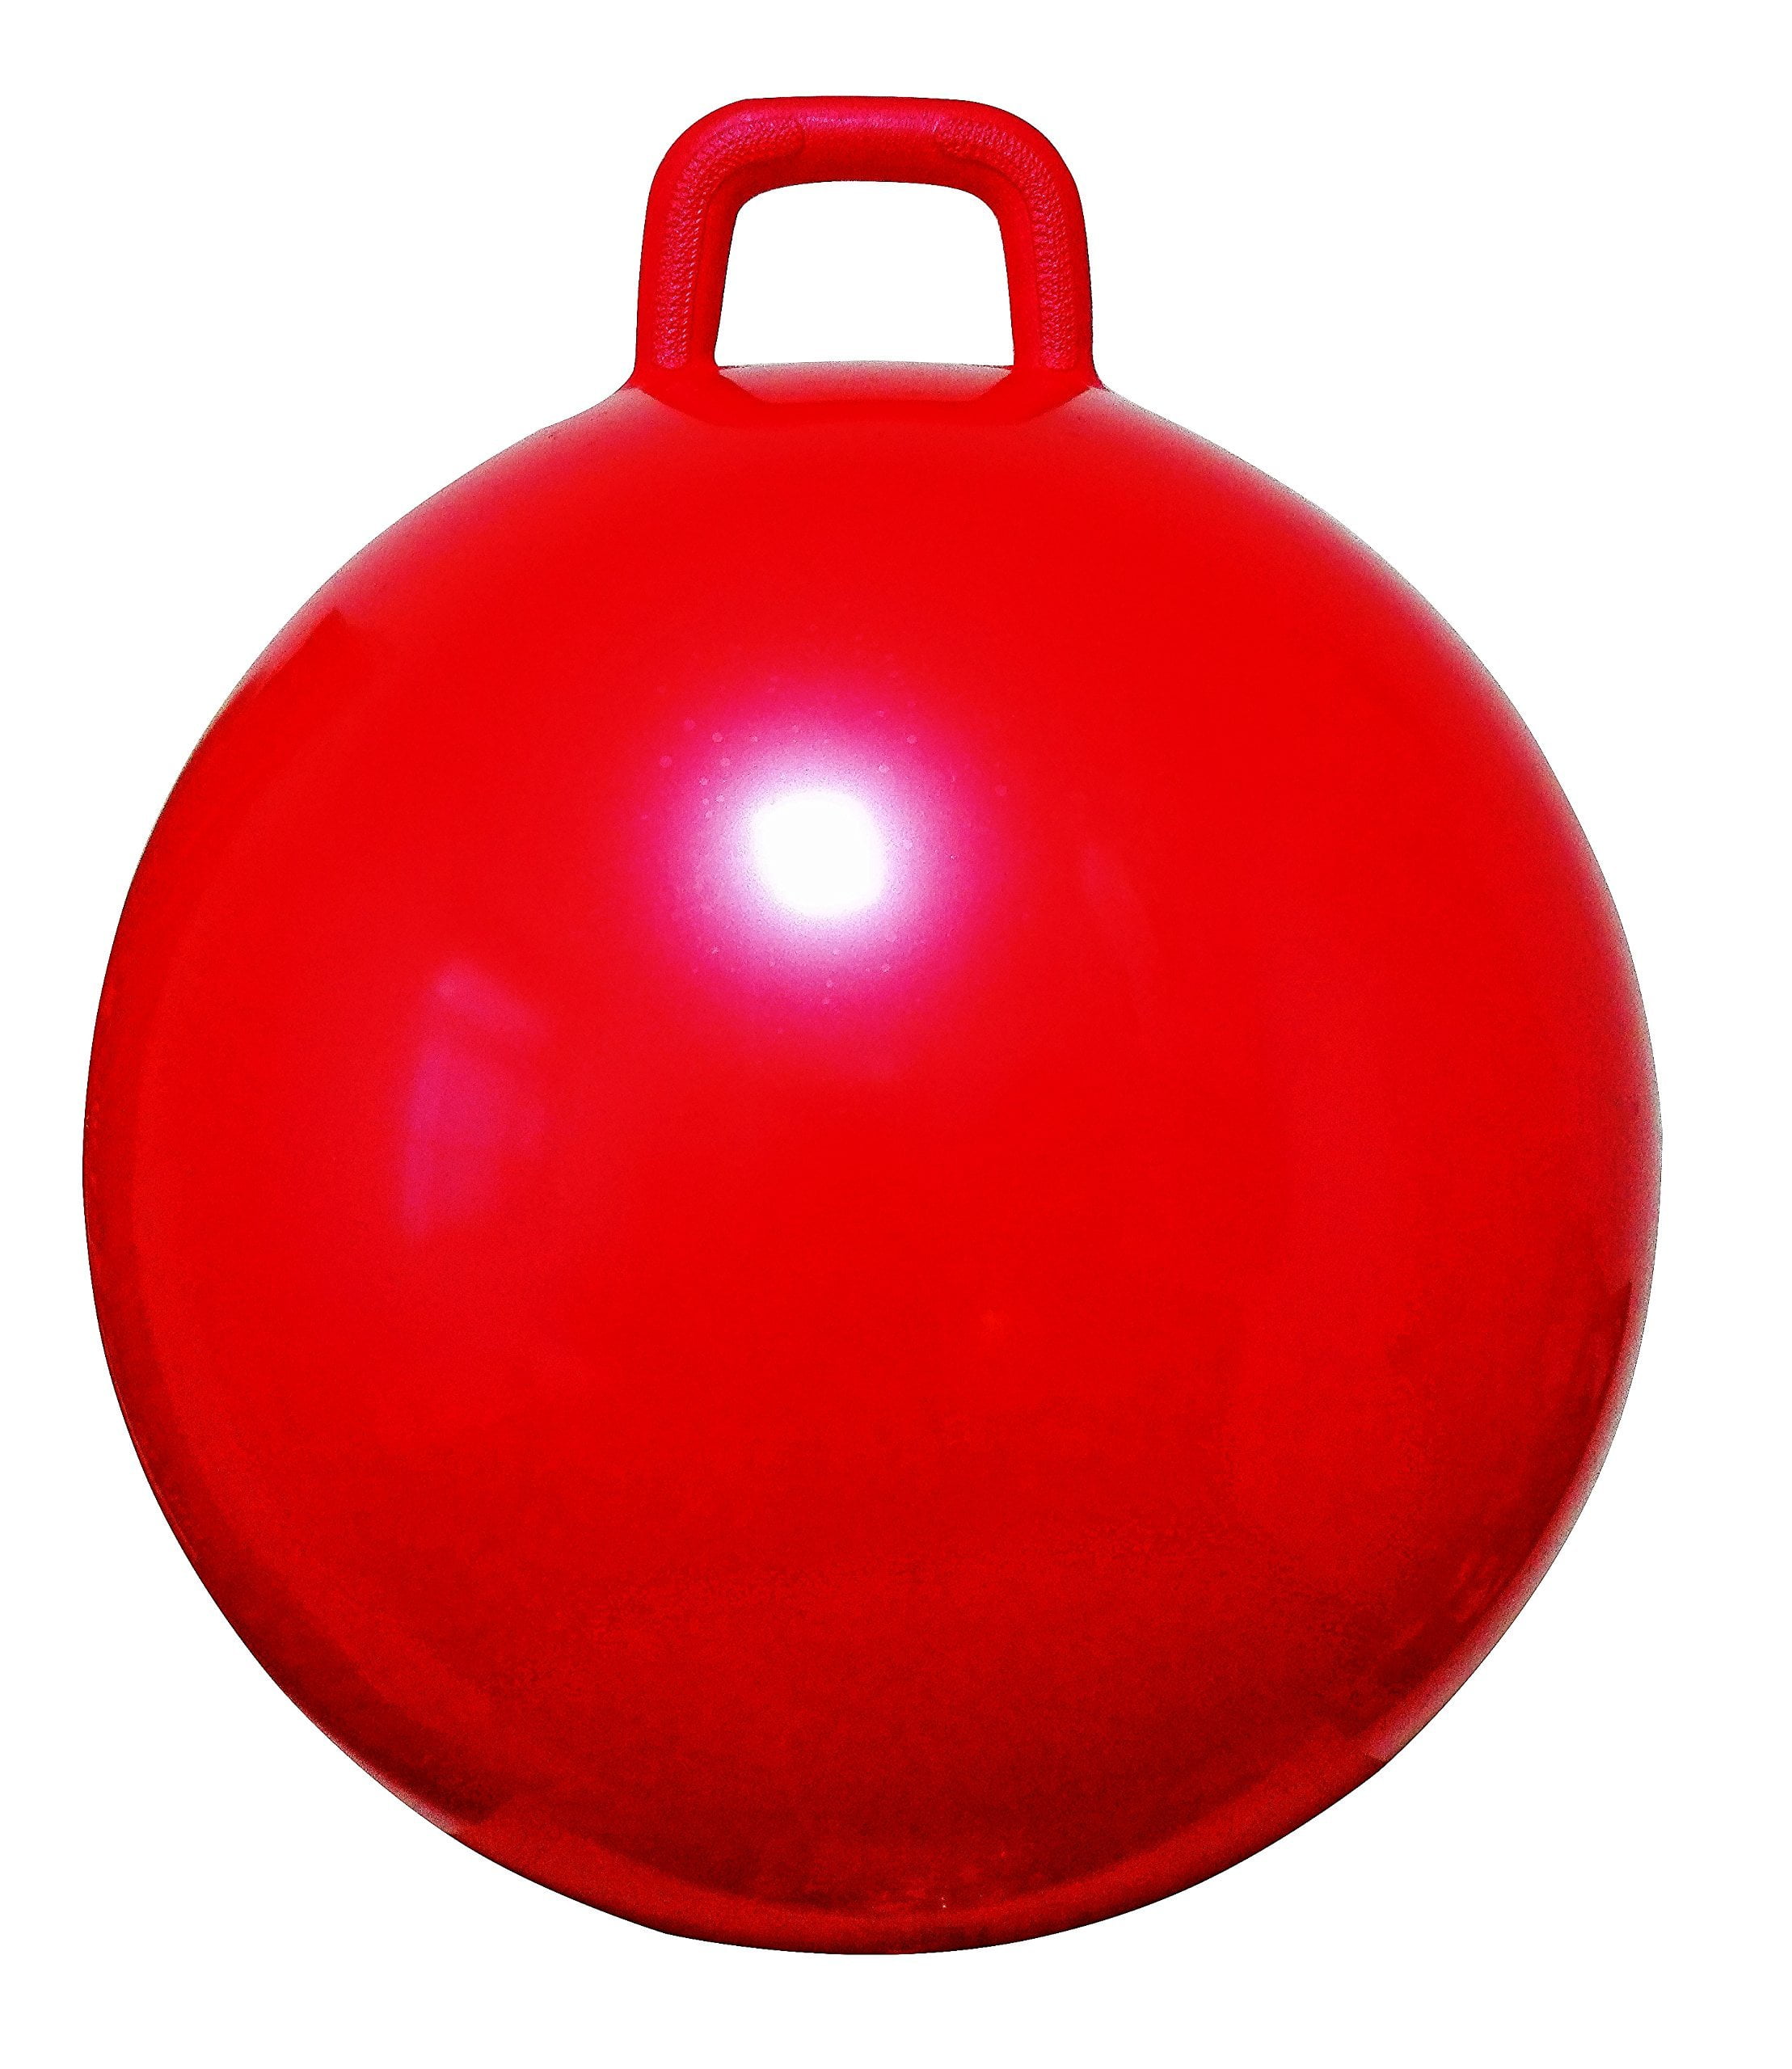 Hoppity Hop Jumping Ball Sit and Bounce Kangaroo Bouncer Hop Ball AppleRound Space Hopper Ball with Air Pump: 28in/70cm Diameter for Ages 13 and Up 